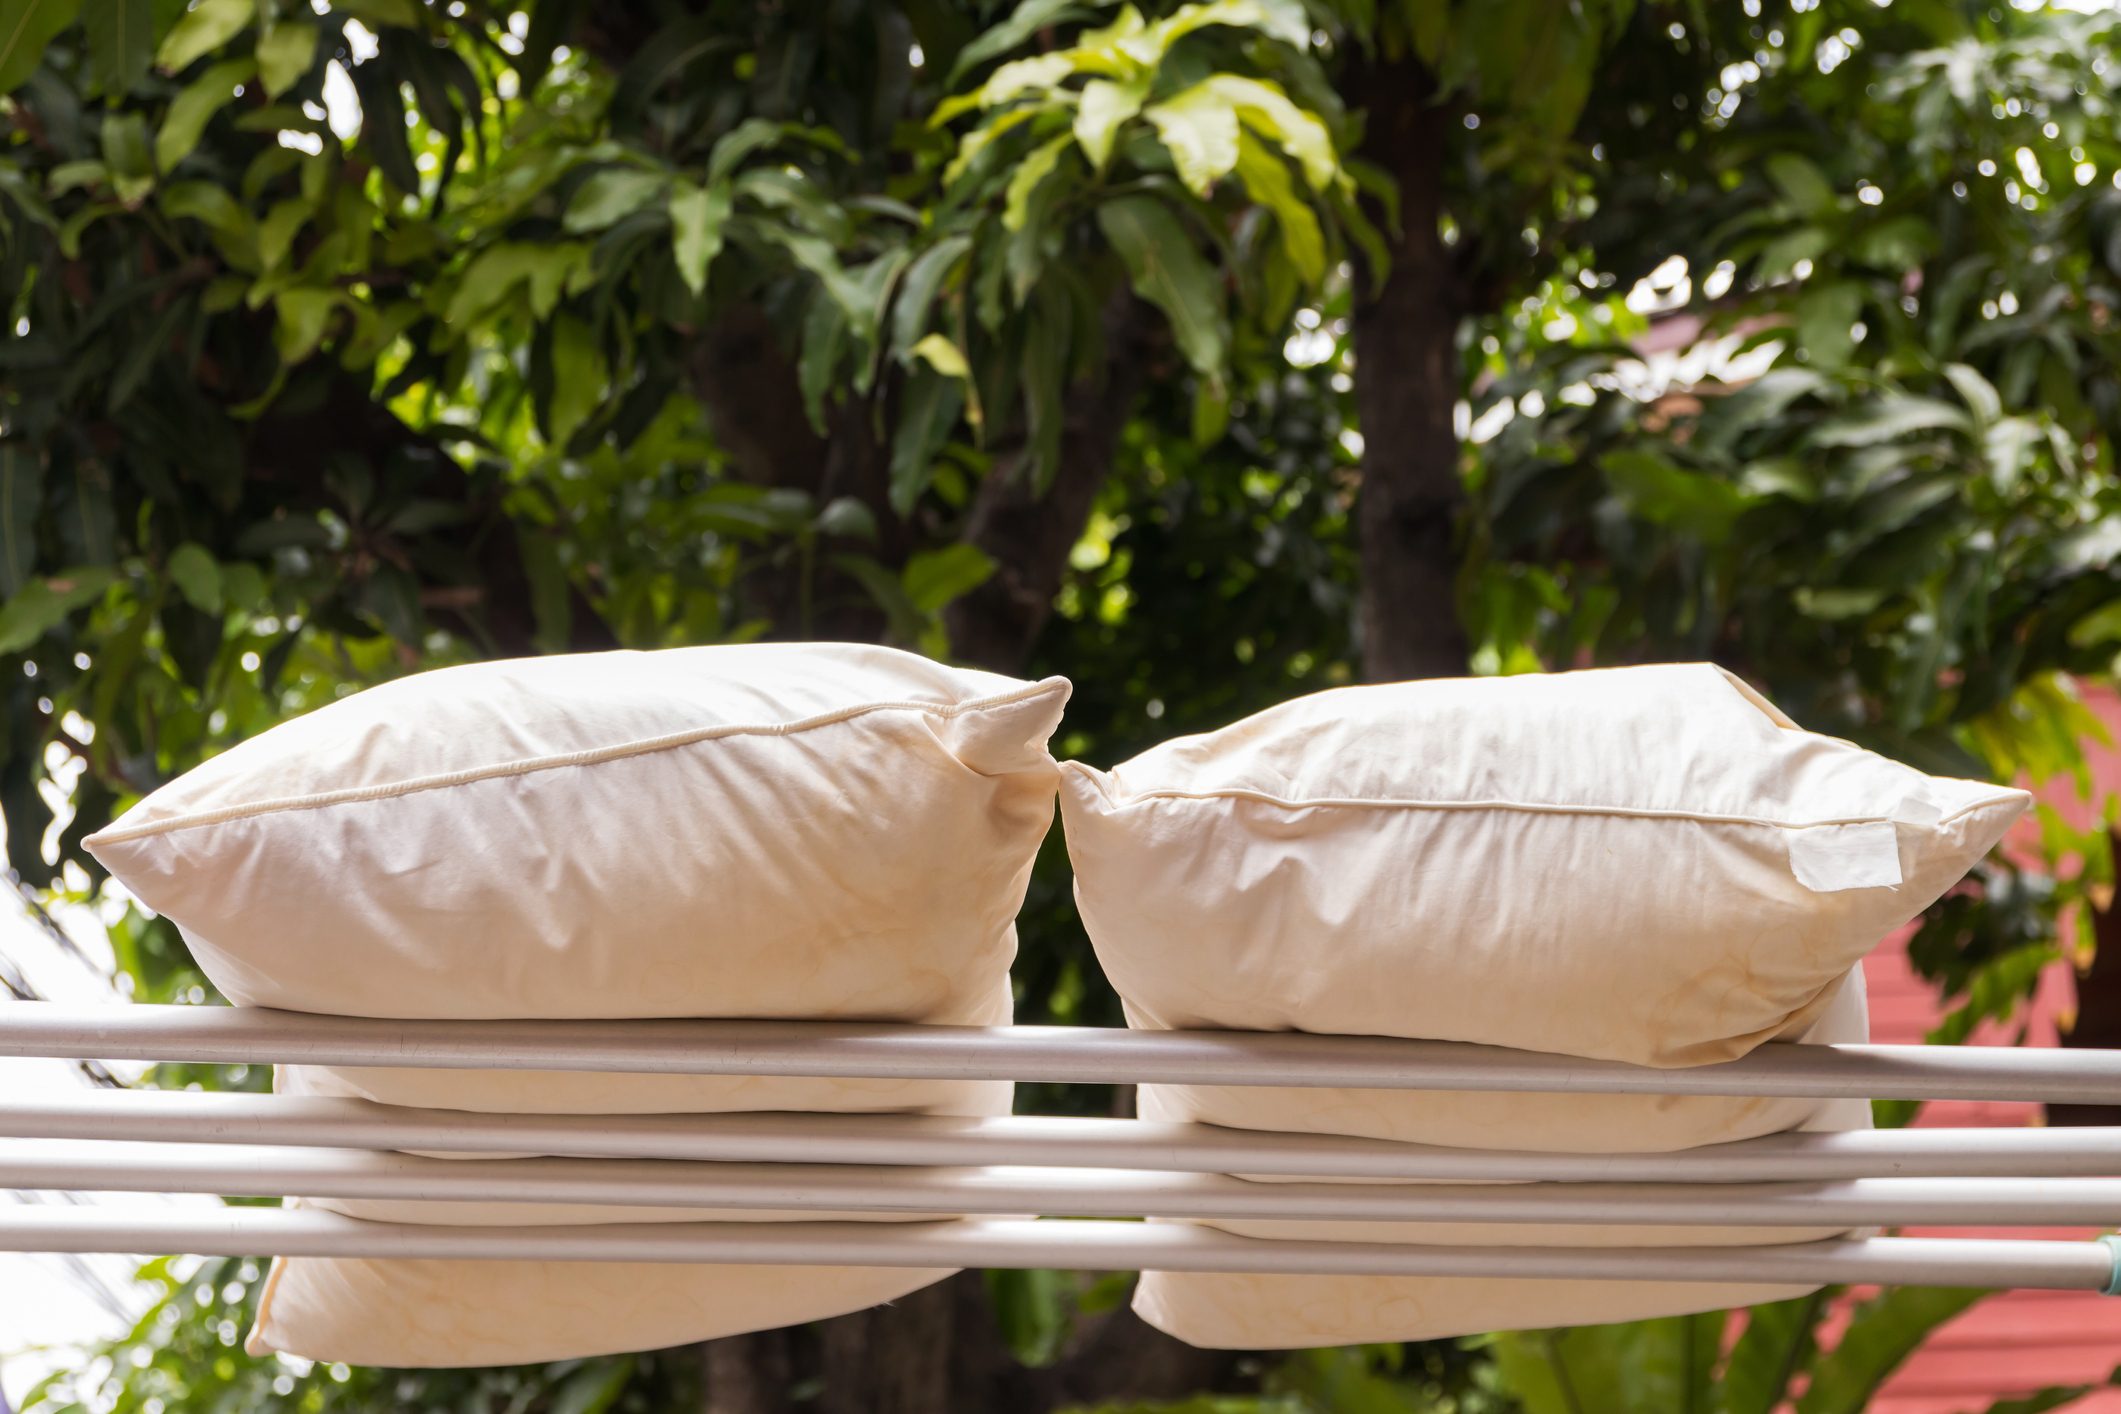 Pillows air drying in the sun to plump up again